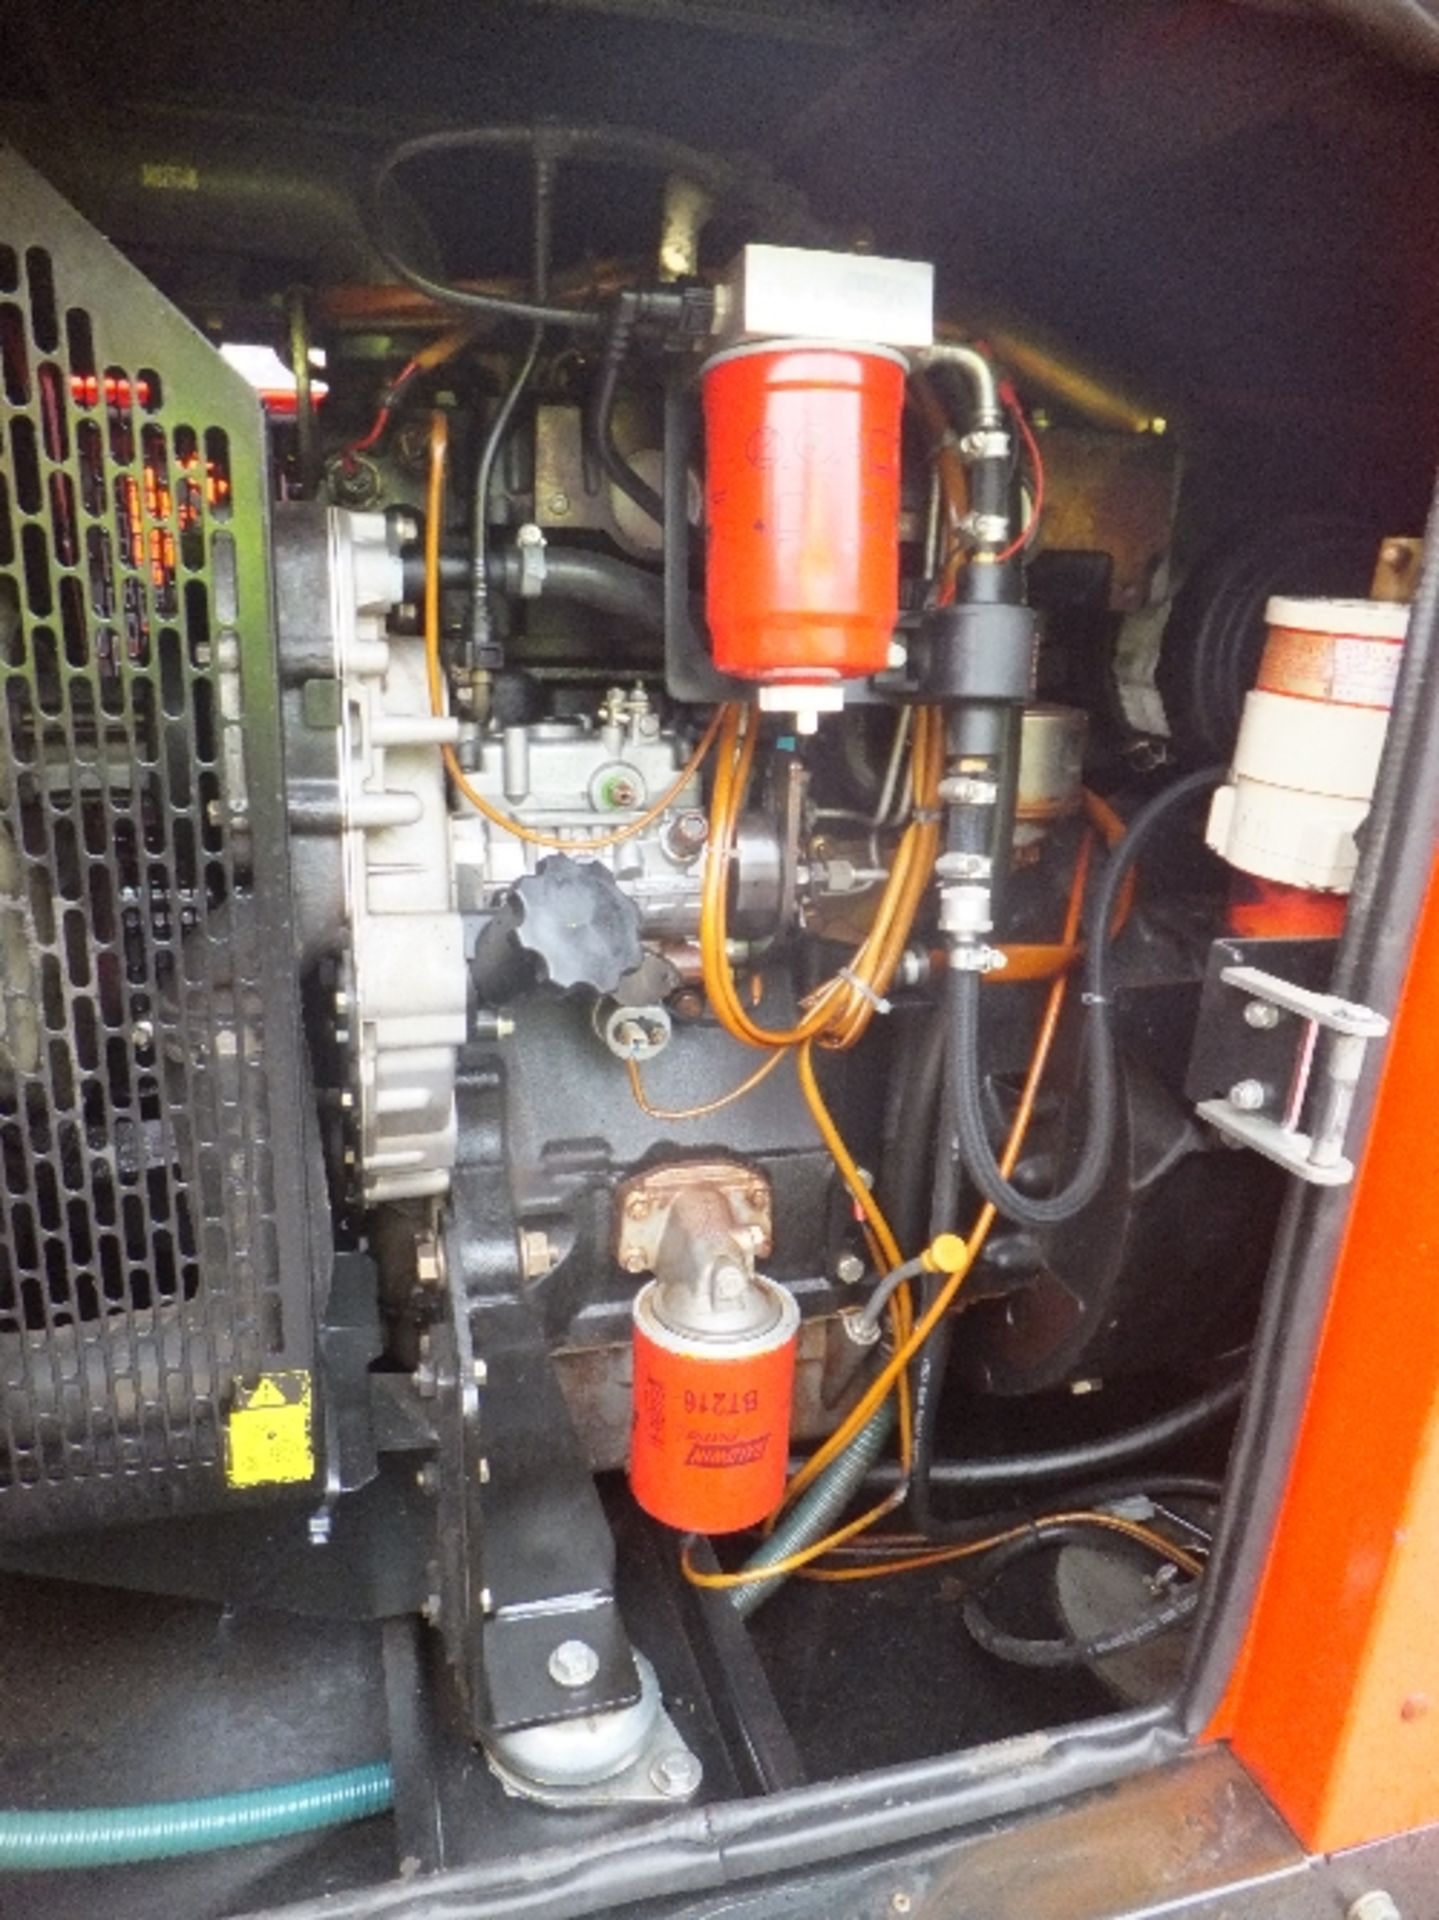 Genset MG50SSP generator 15838 hrs - fuel leak This lot is sold on instruction of Speedy - Image 4 of 5